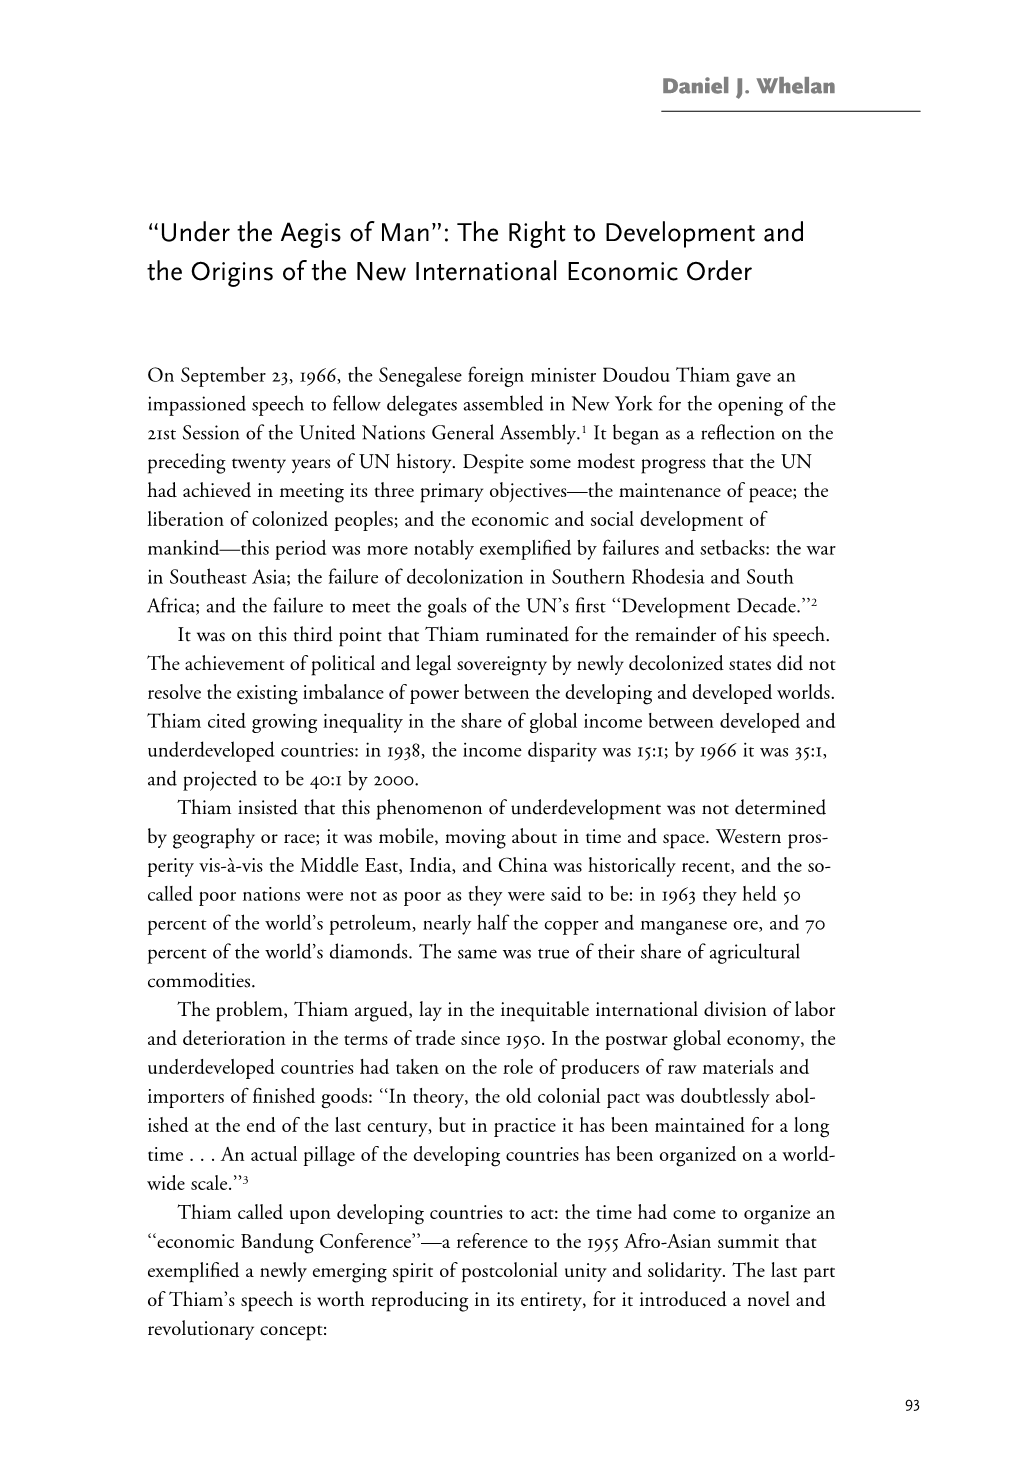 The Right to Development and the Origins of the New International Economic Order